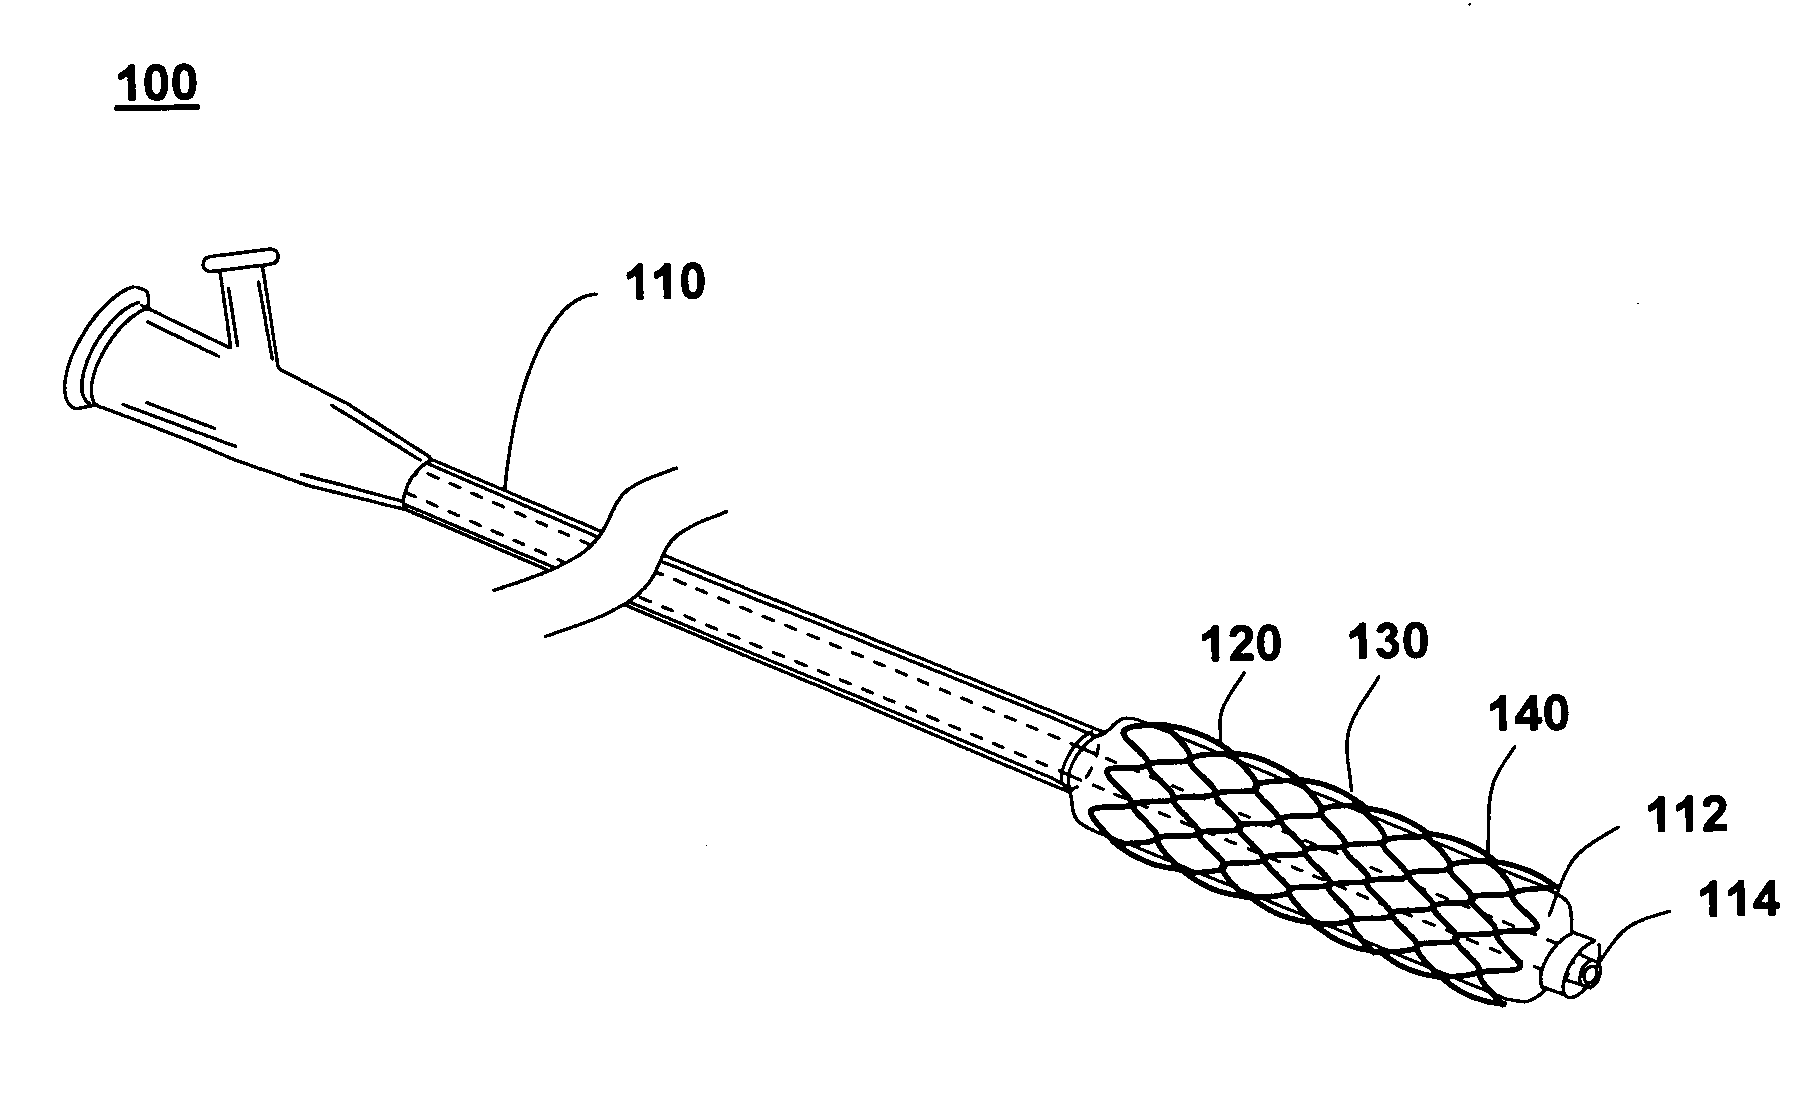 Laminated drug-polymer coated stent with dipped and cured layers